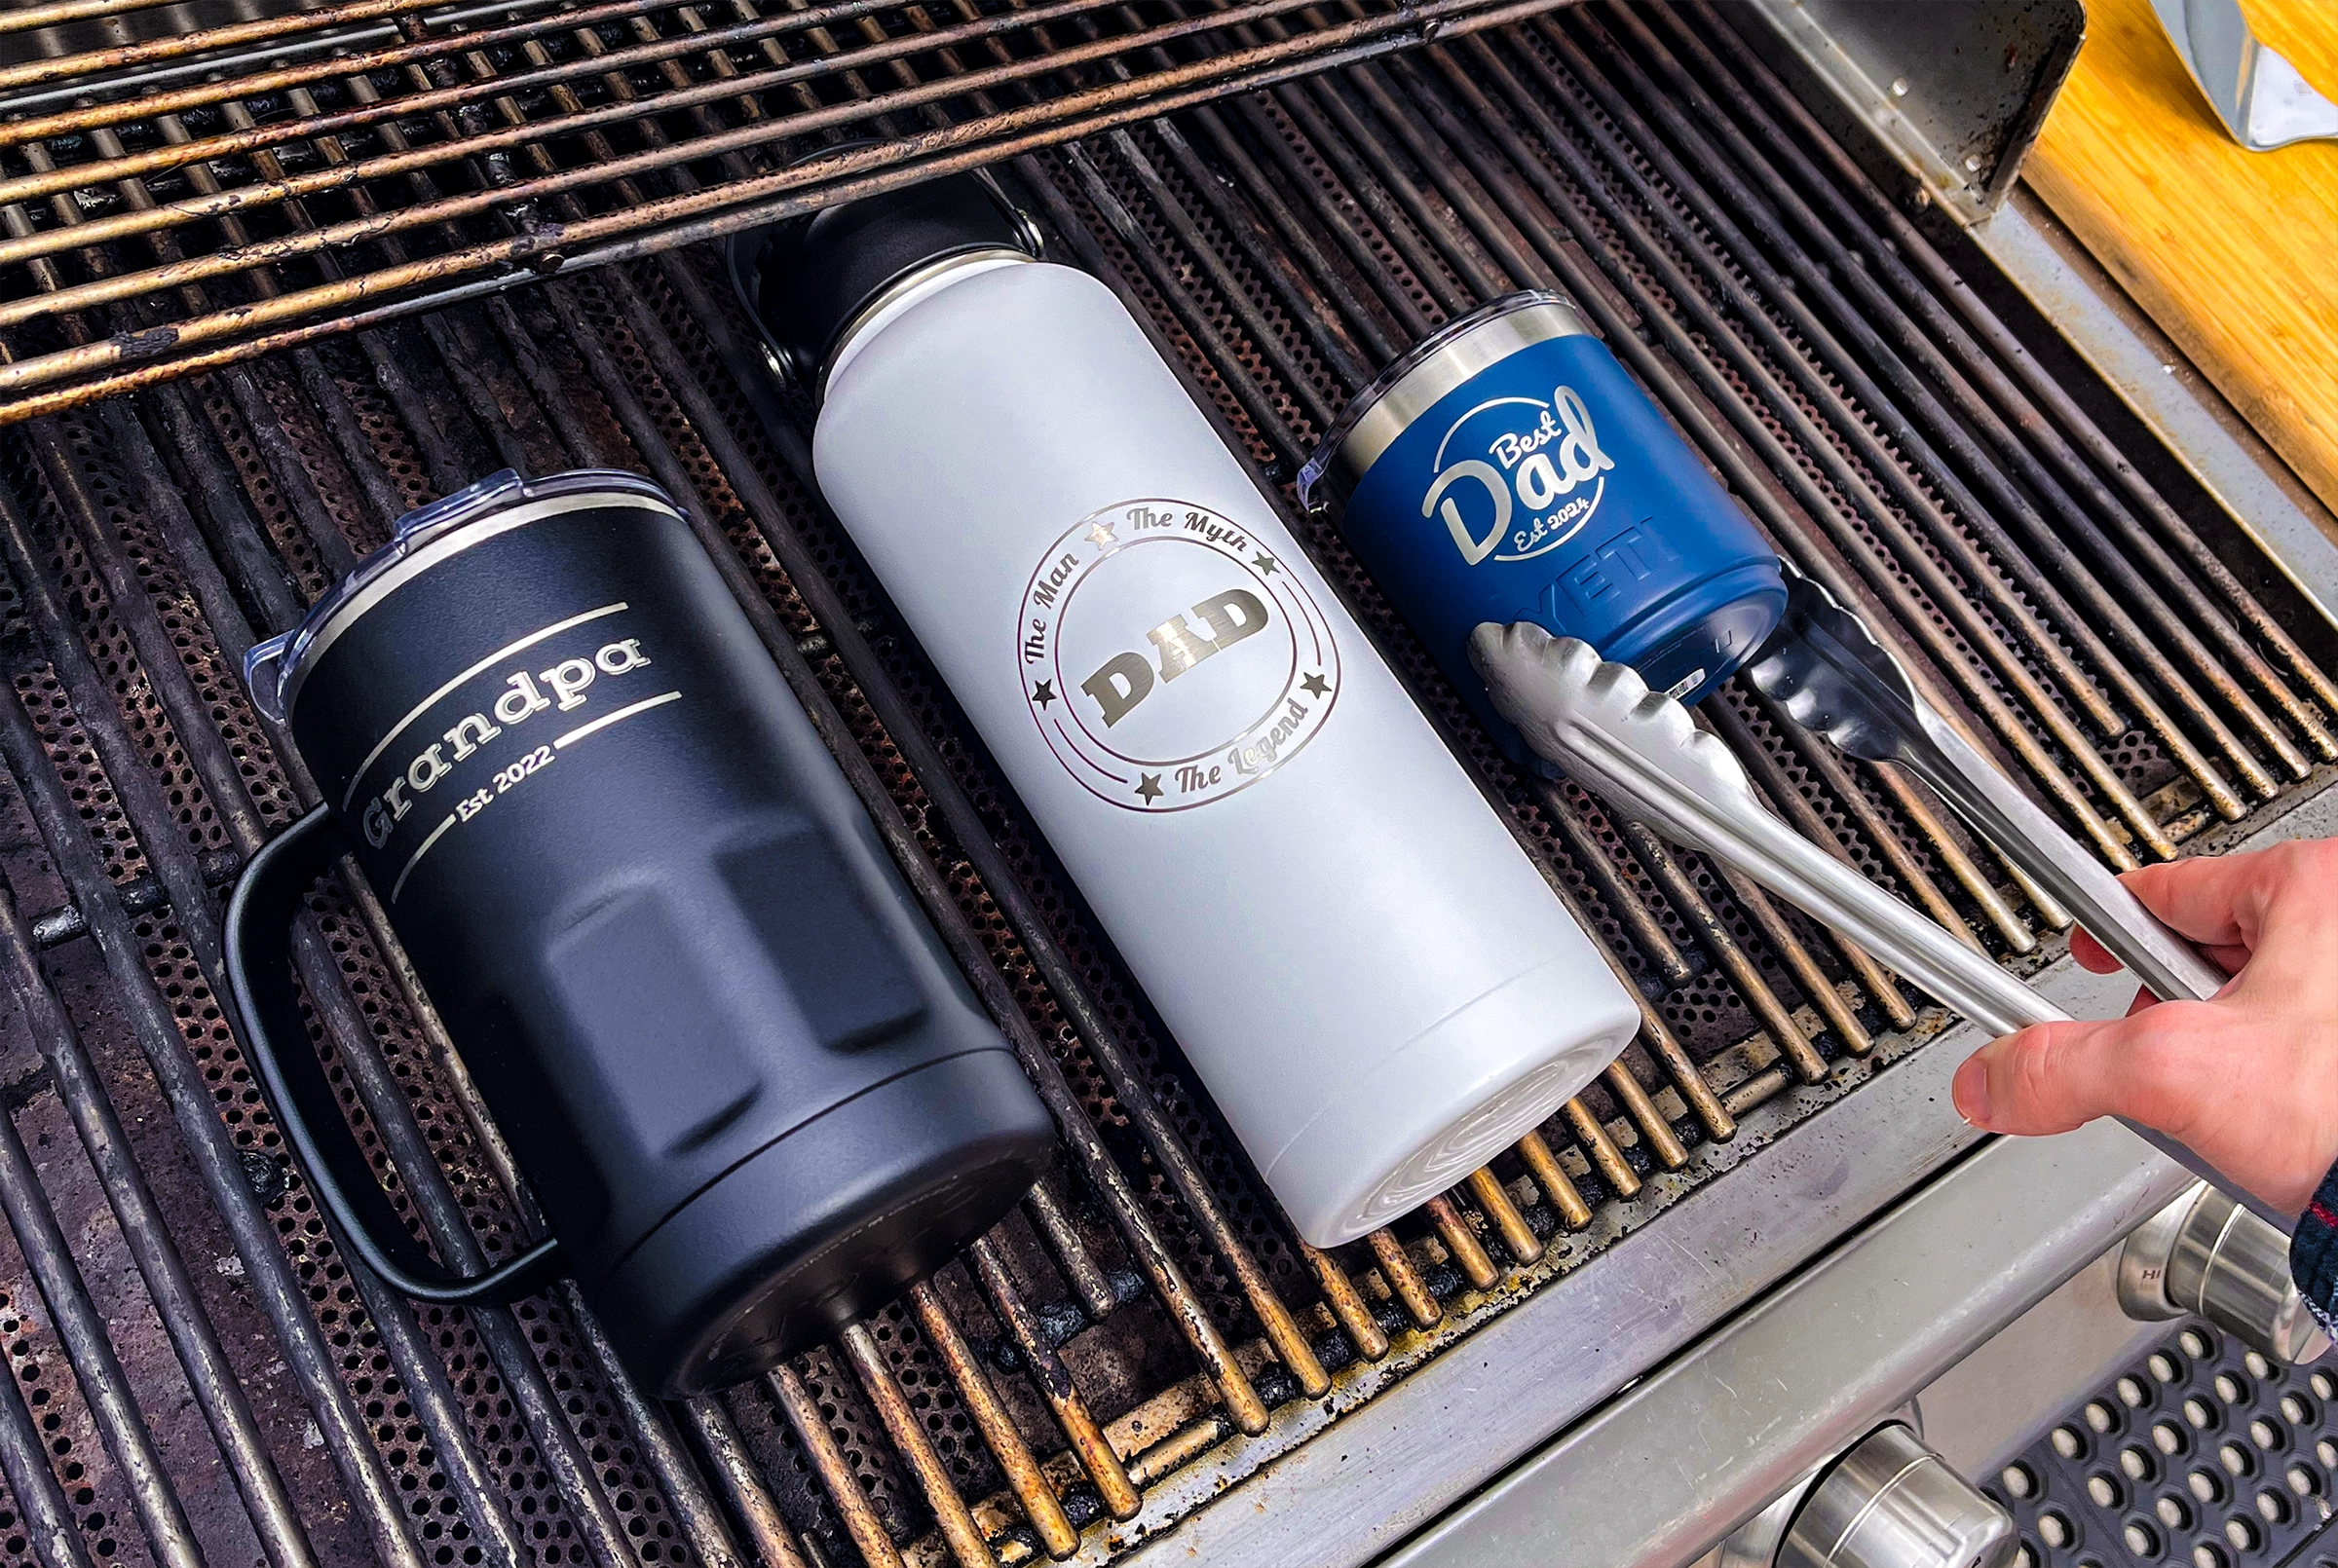 engraved mug and bottle on a grill personalized for father's day